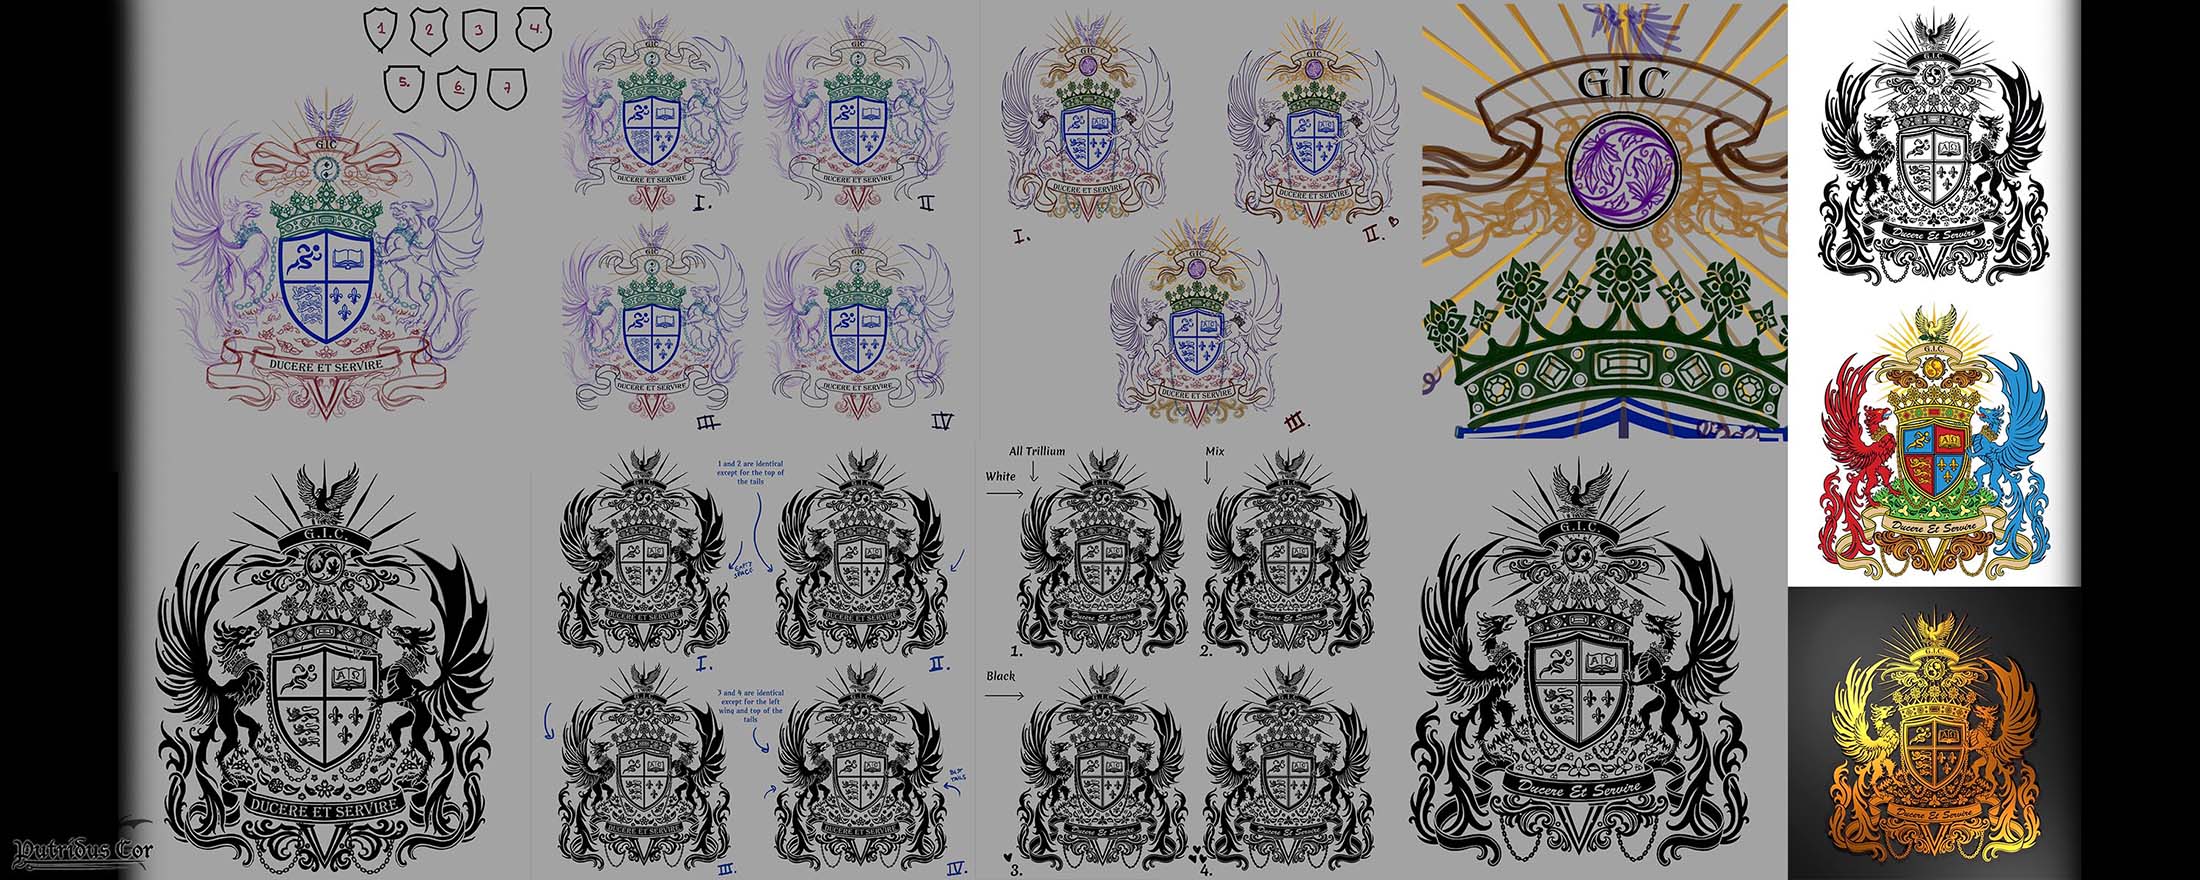 Process of making a Coat of Arms Design, with a Phoenix and a Dragon, by Putridus Cor